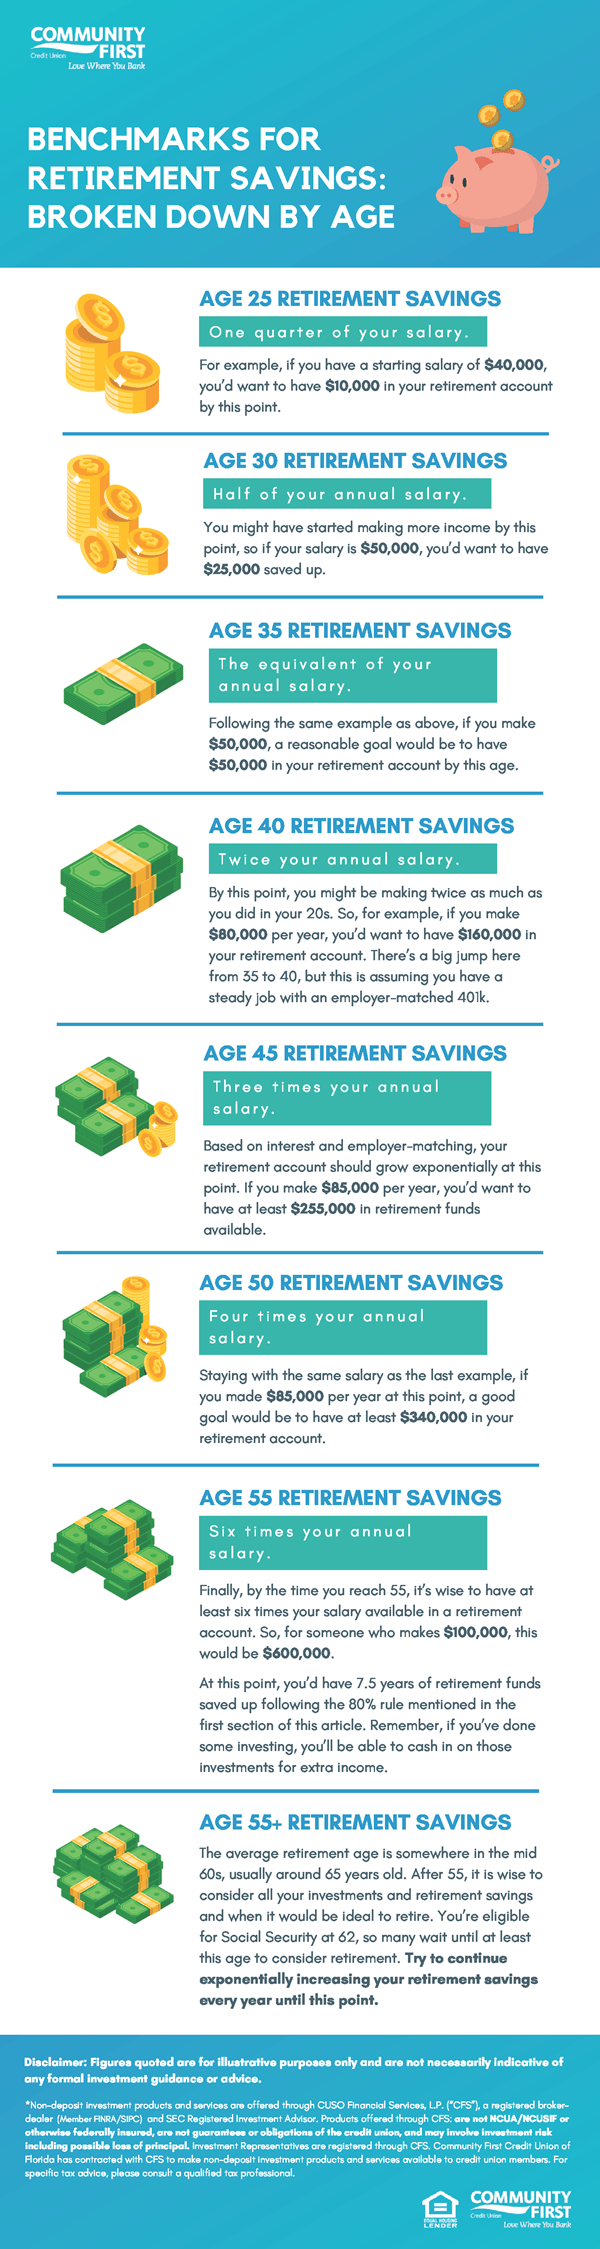 Benchmarks for Retirement Savings by Age